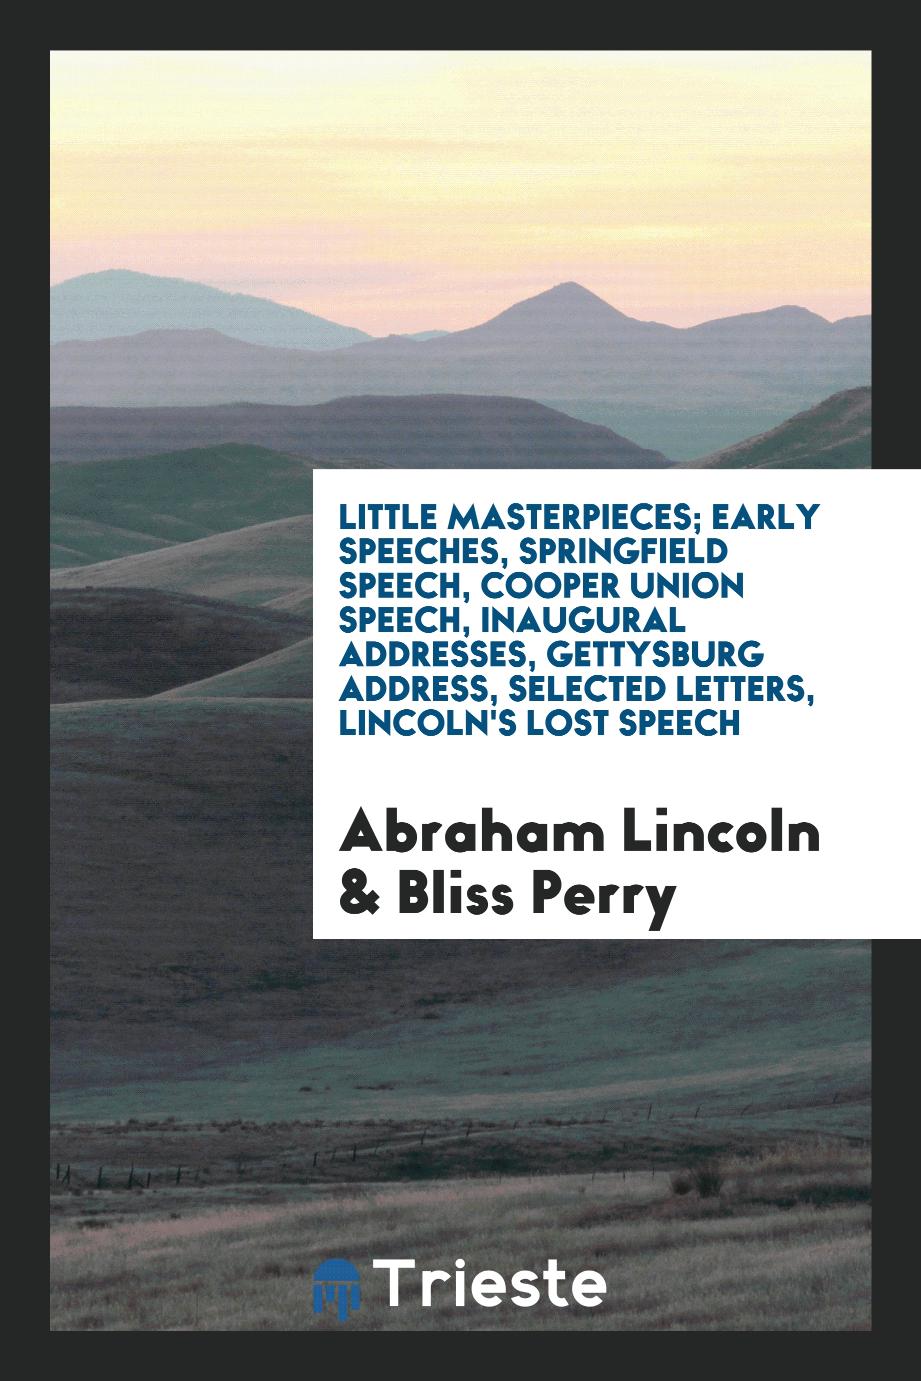 Little masterpieces; Early speeches, Springfield speech, Cooper union speech, inaugural addresses, Gettysburg address, selected letters, Lincoln's lost speech